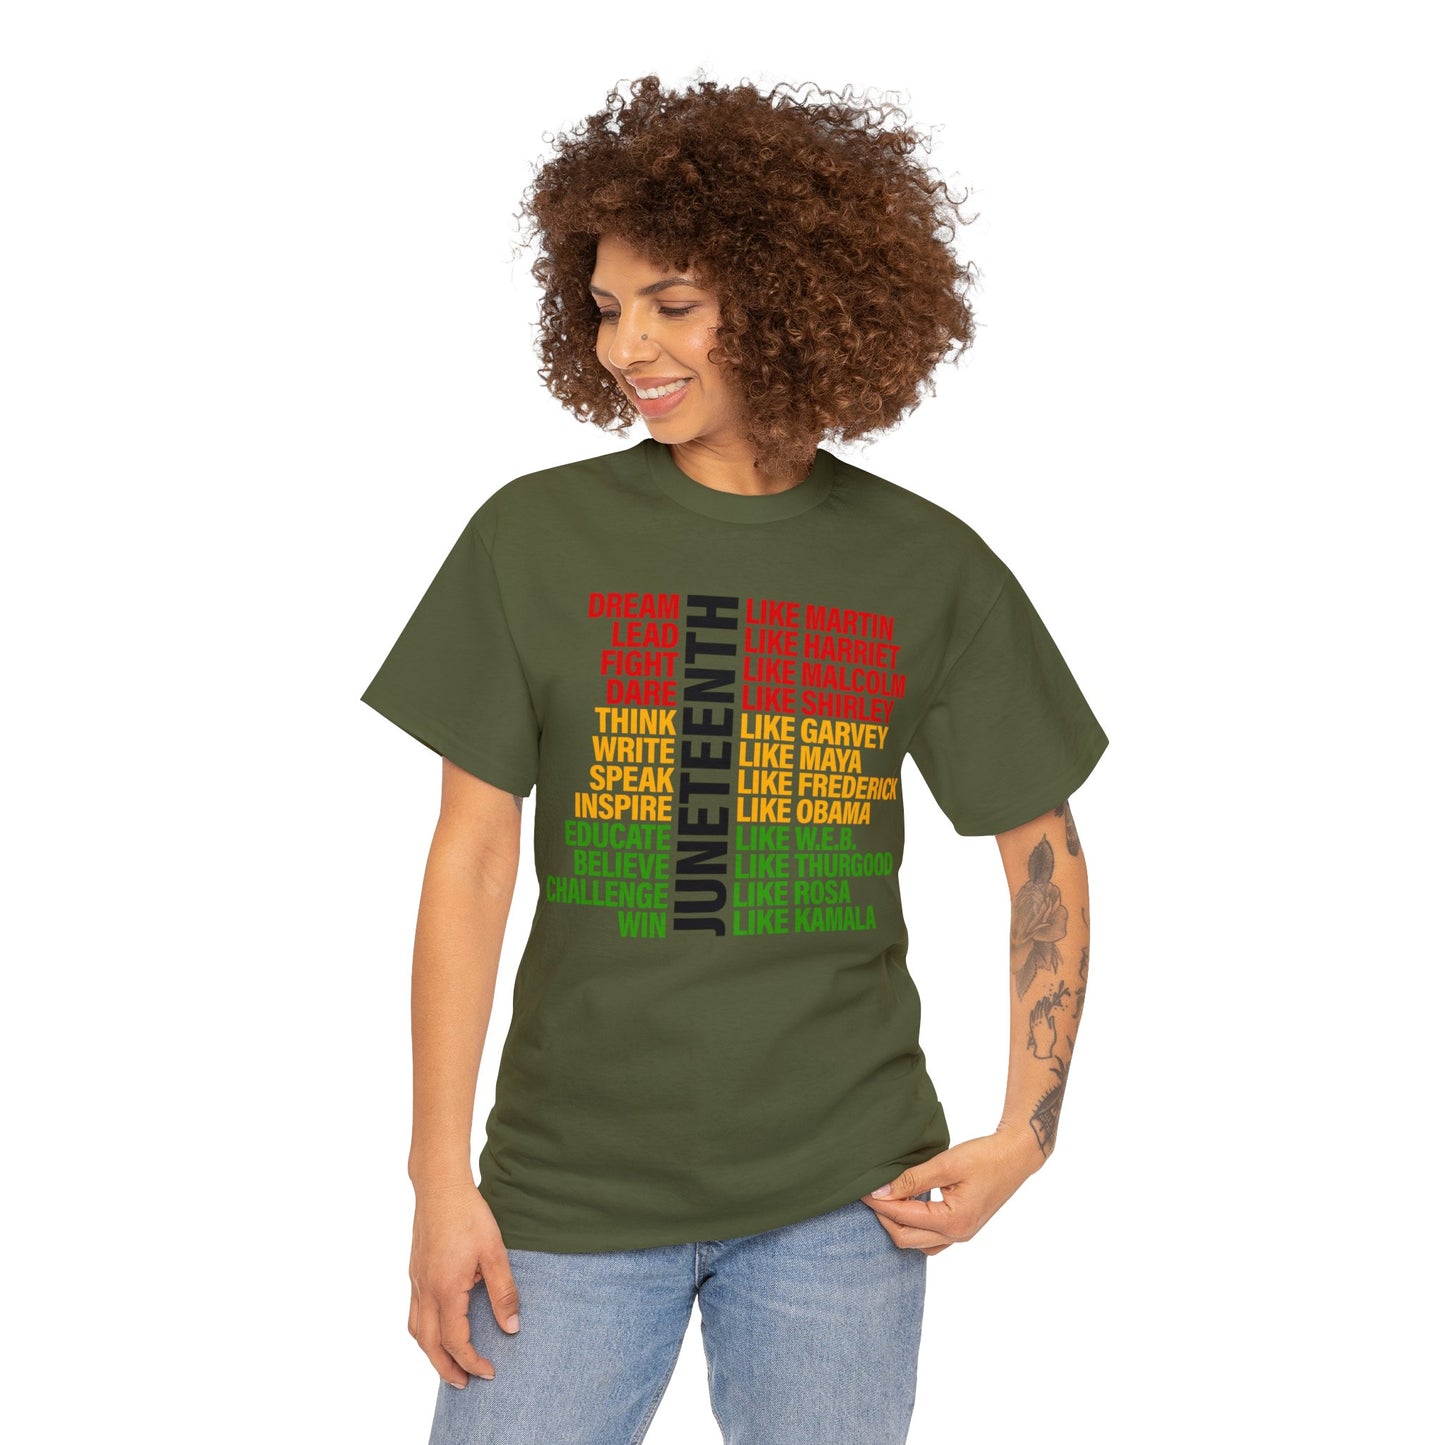 Unisex Juneteenth Homage Tee - Express Delivery available